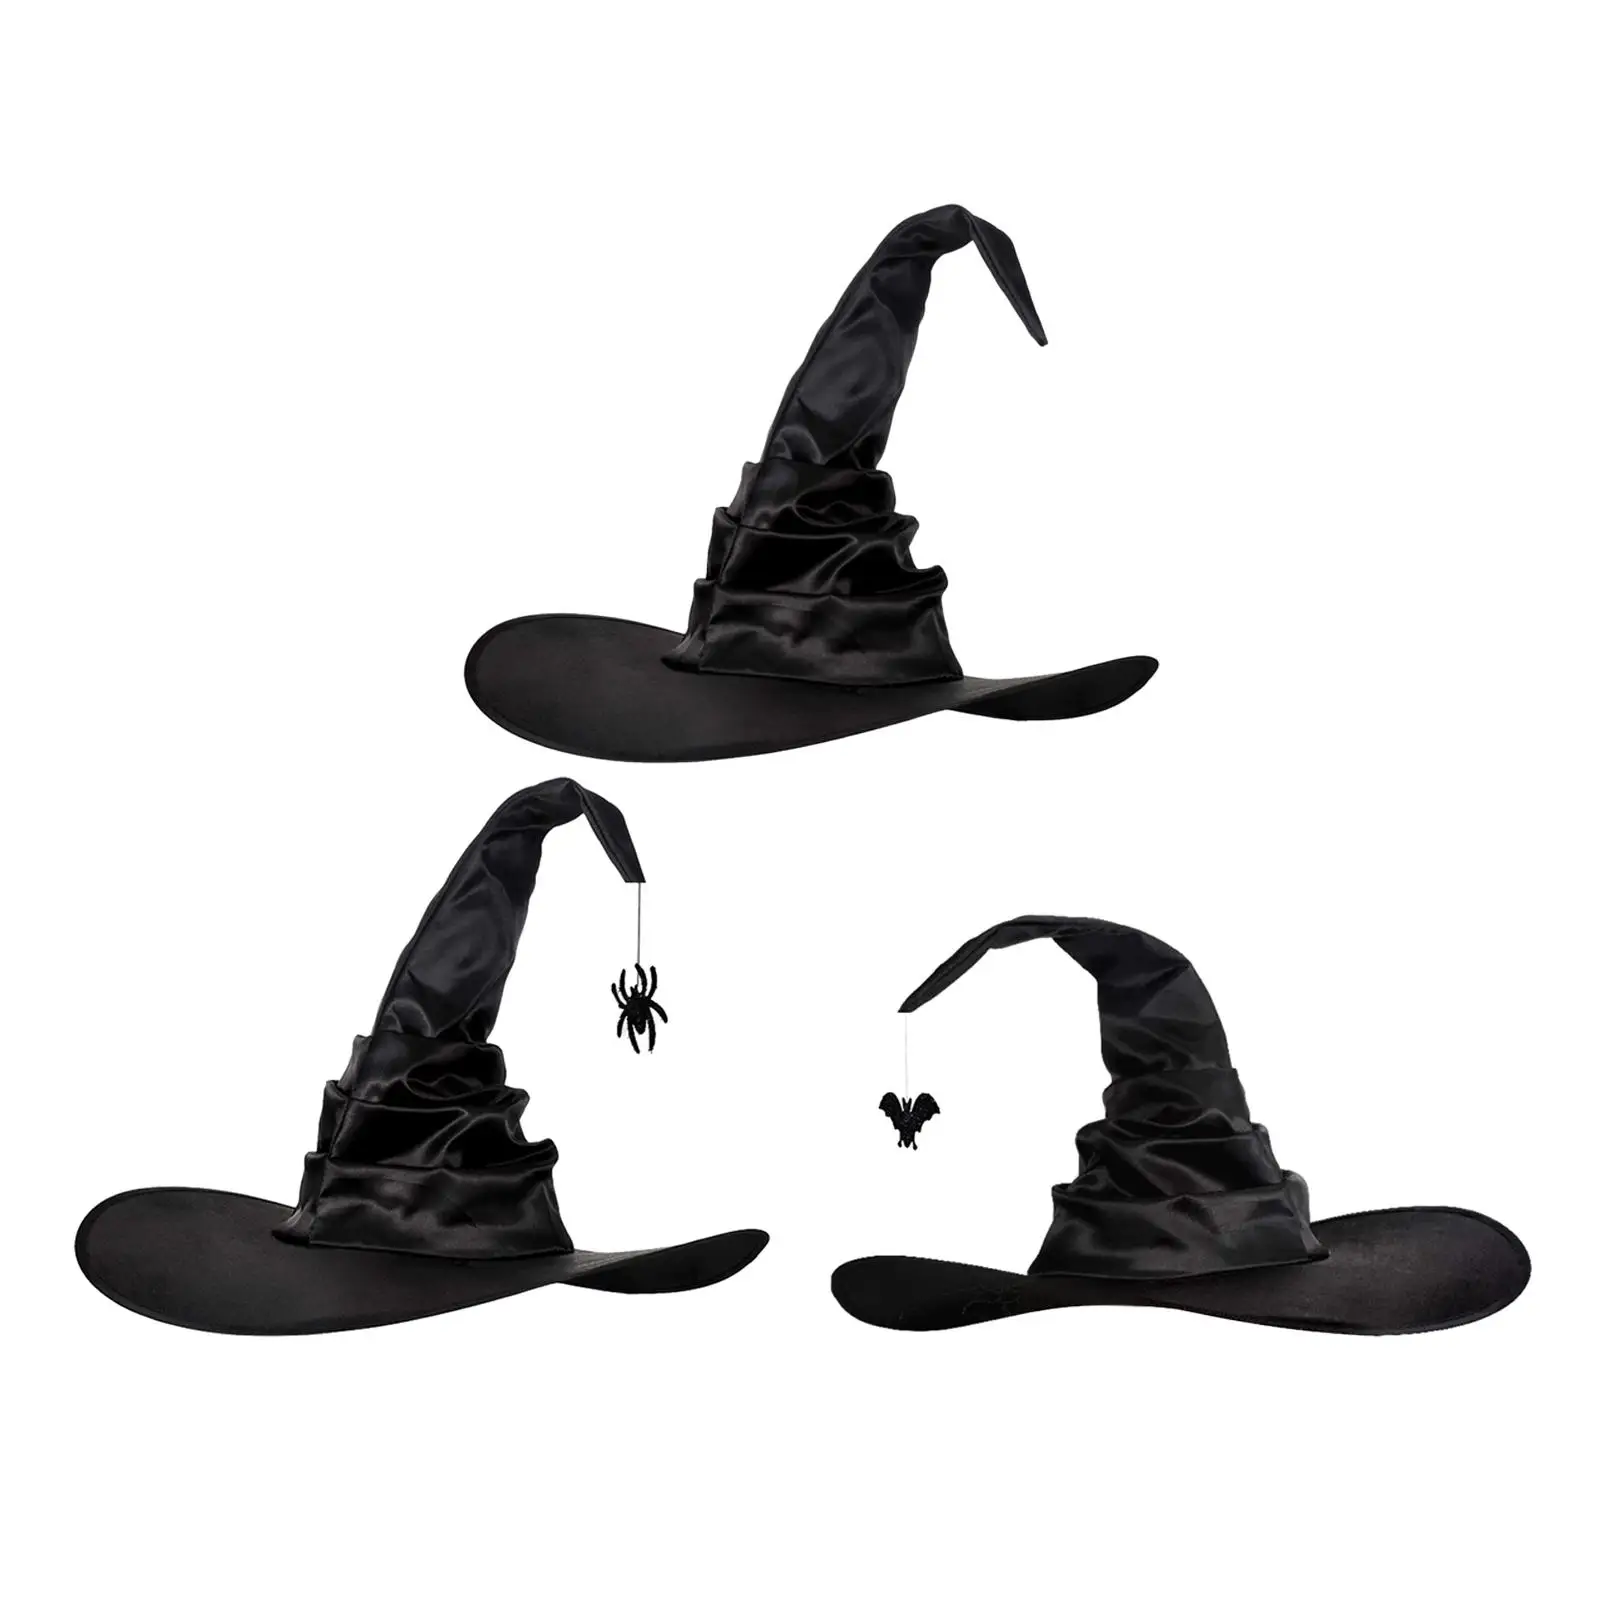 Pointed Sorceress Hat Wizard Costume Accessory Headgear Wide Brim Witch Women Men Hat for Halloween Cosplay Masquerade